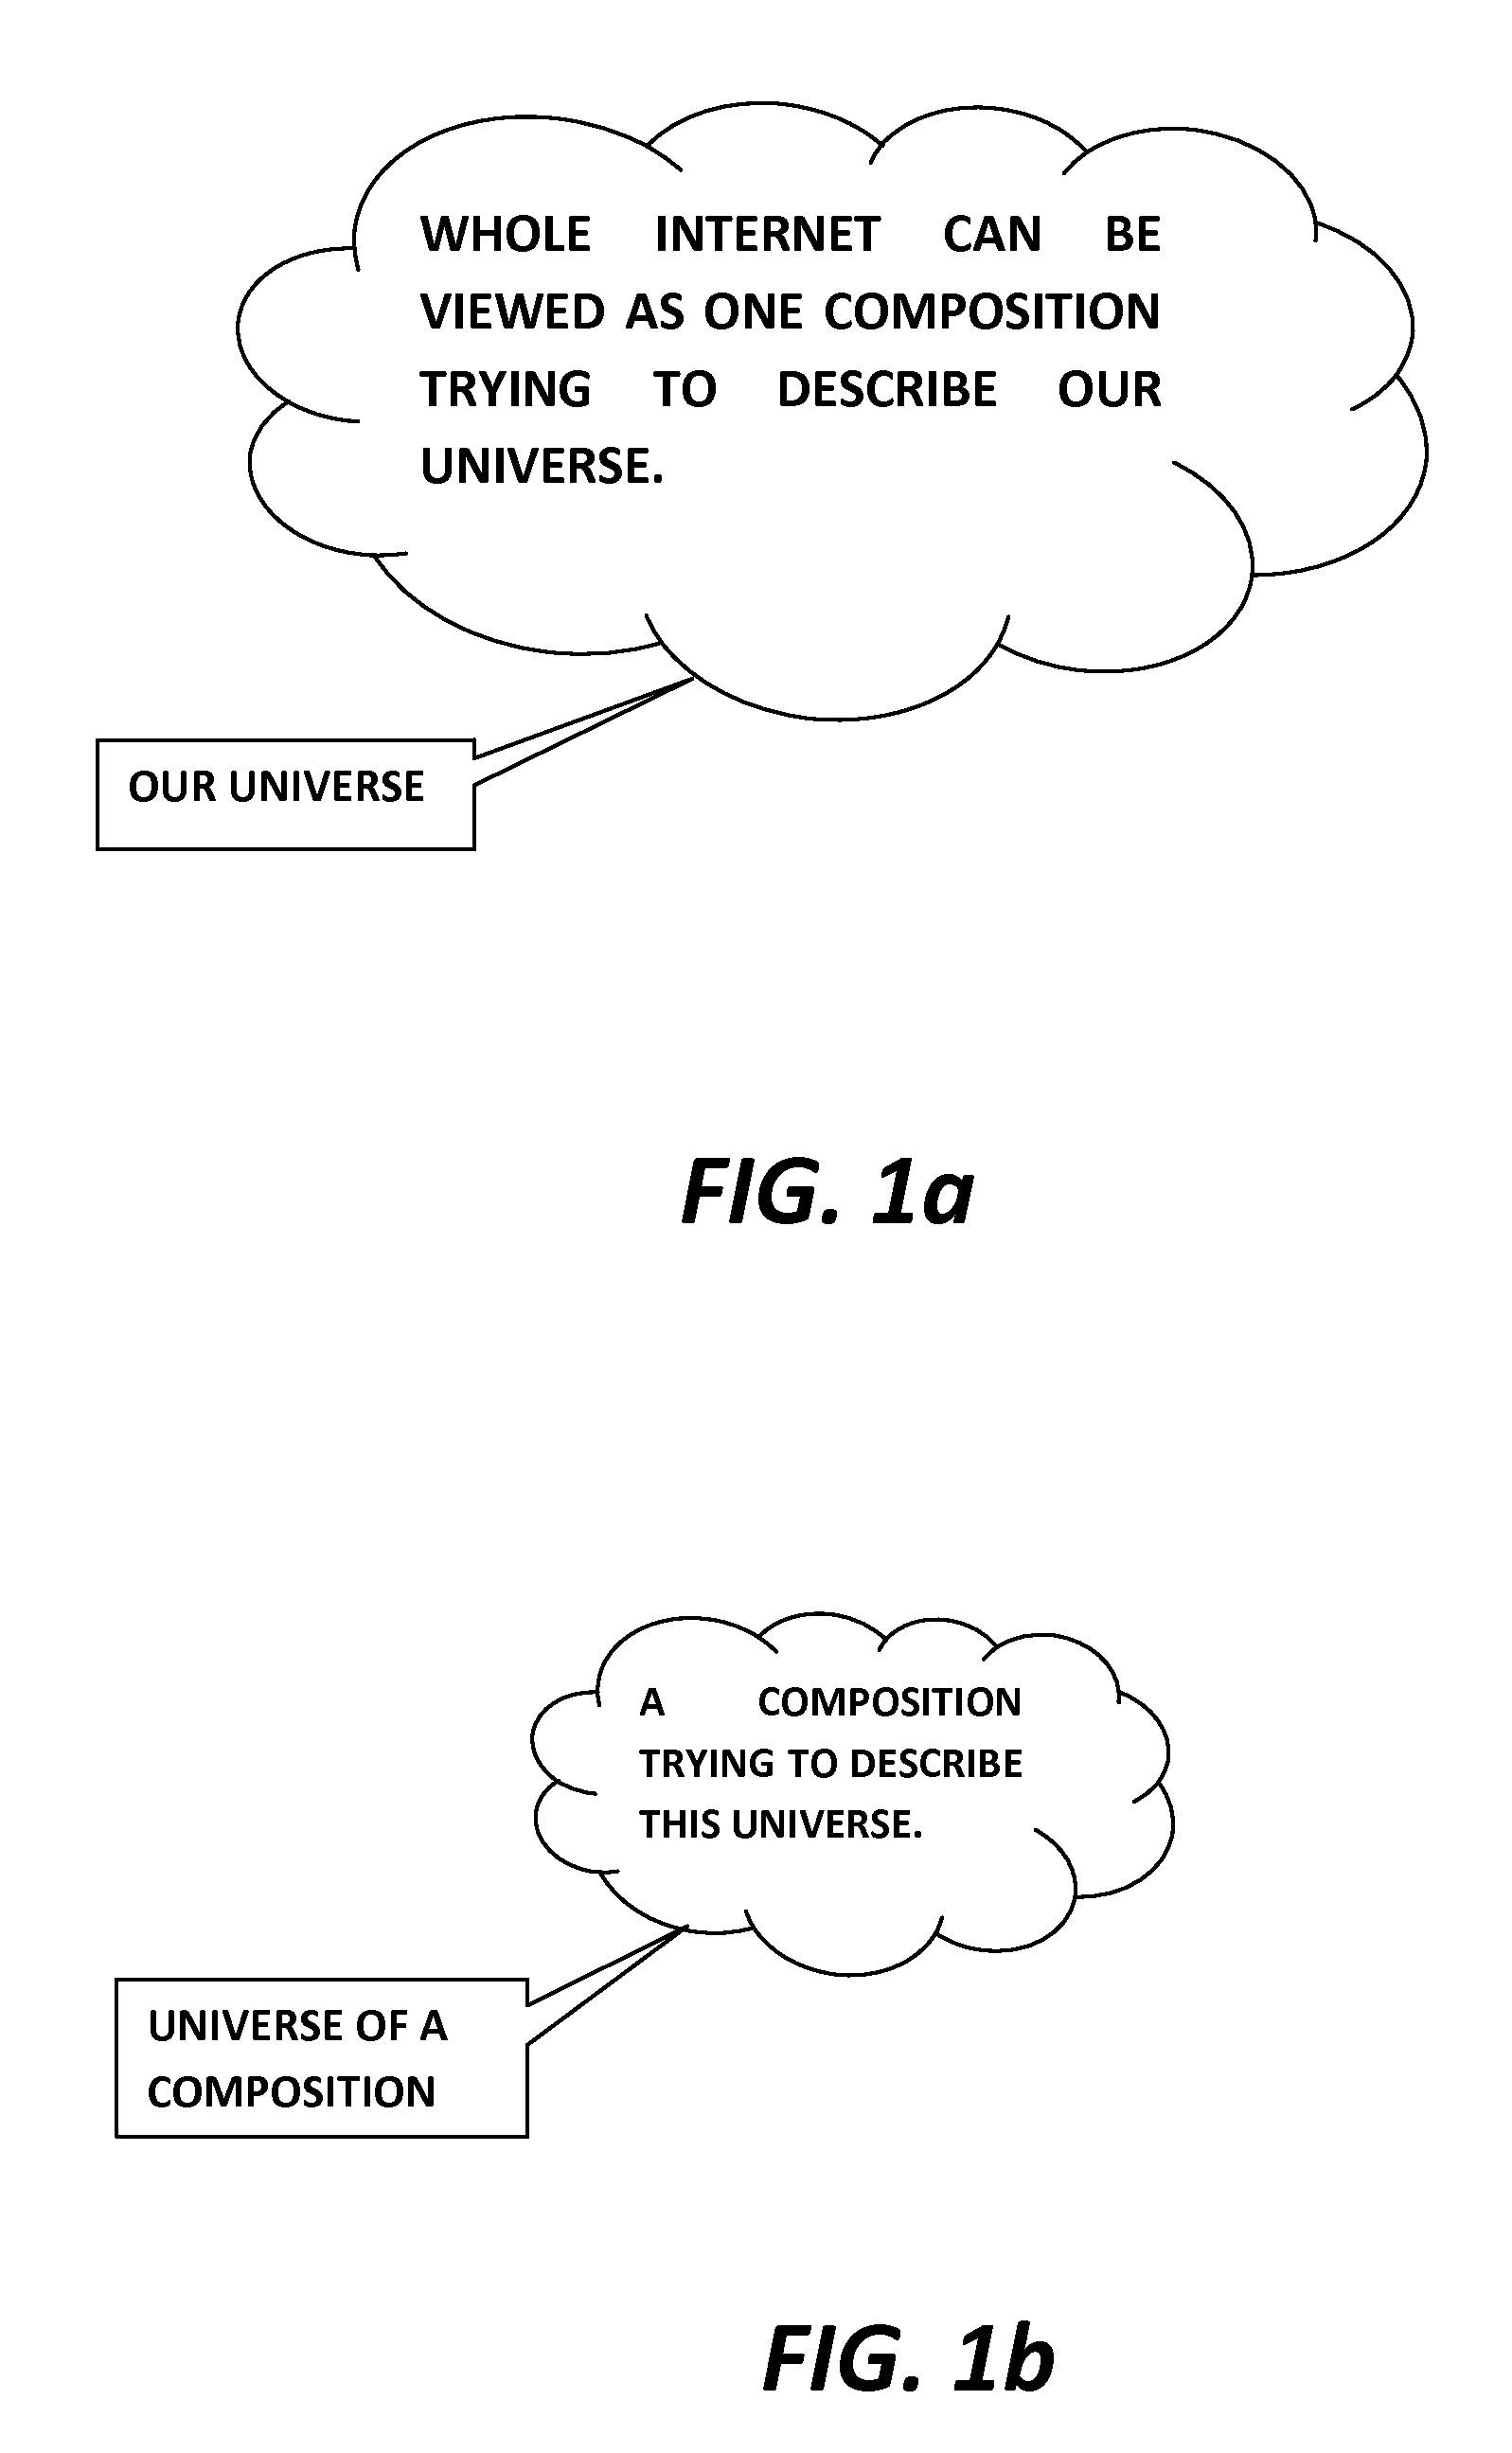 System and Method of Ontological Subject Mapping for Knowledge Processing Applications